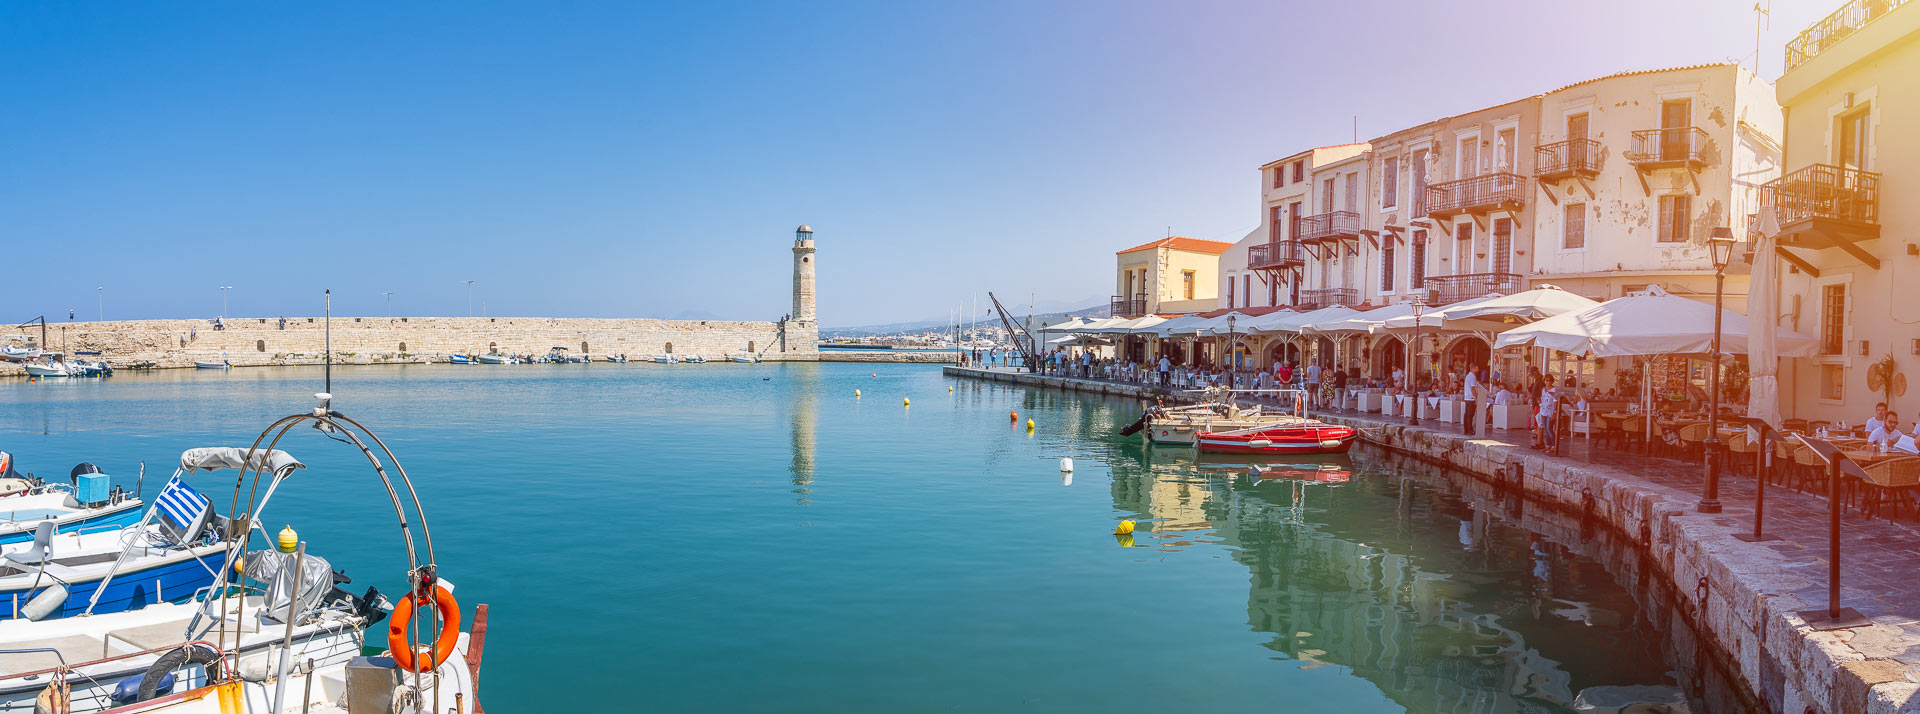 Rethymnon - a week in Crete itinerary